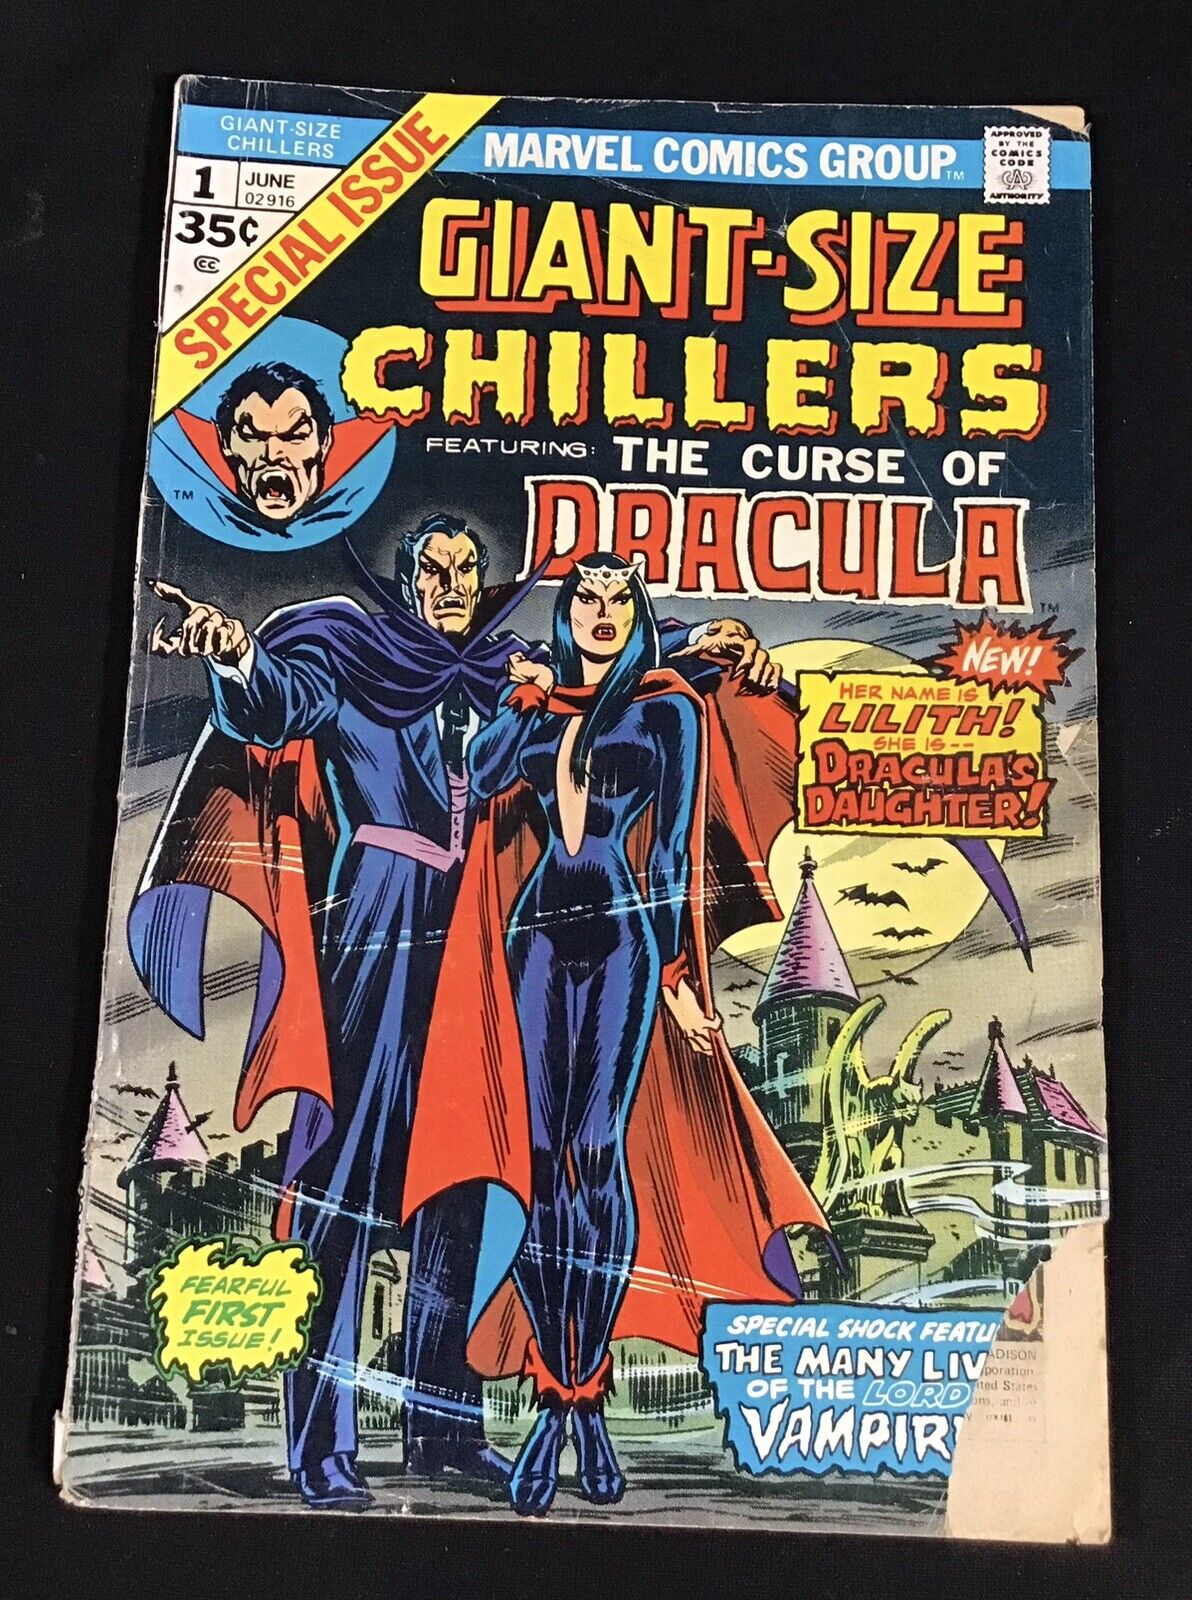 Vintage 1974 Marvel Giant Size Chillers Dracula Origin Lilith #1 Comic Book